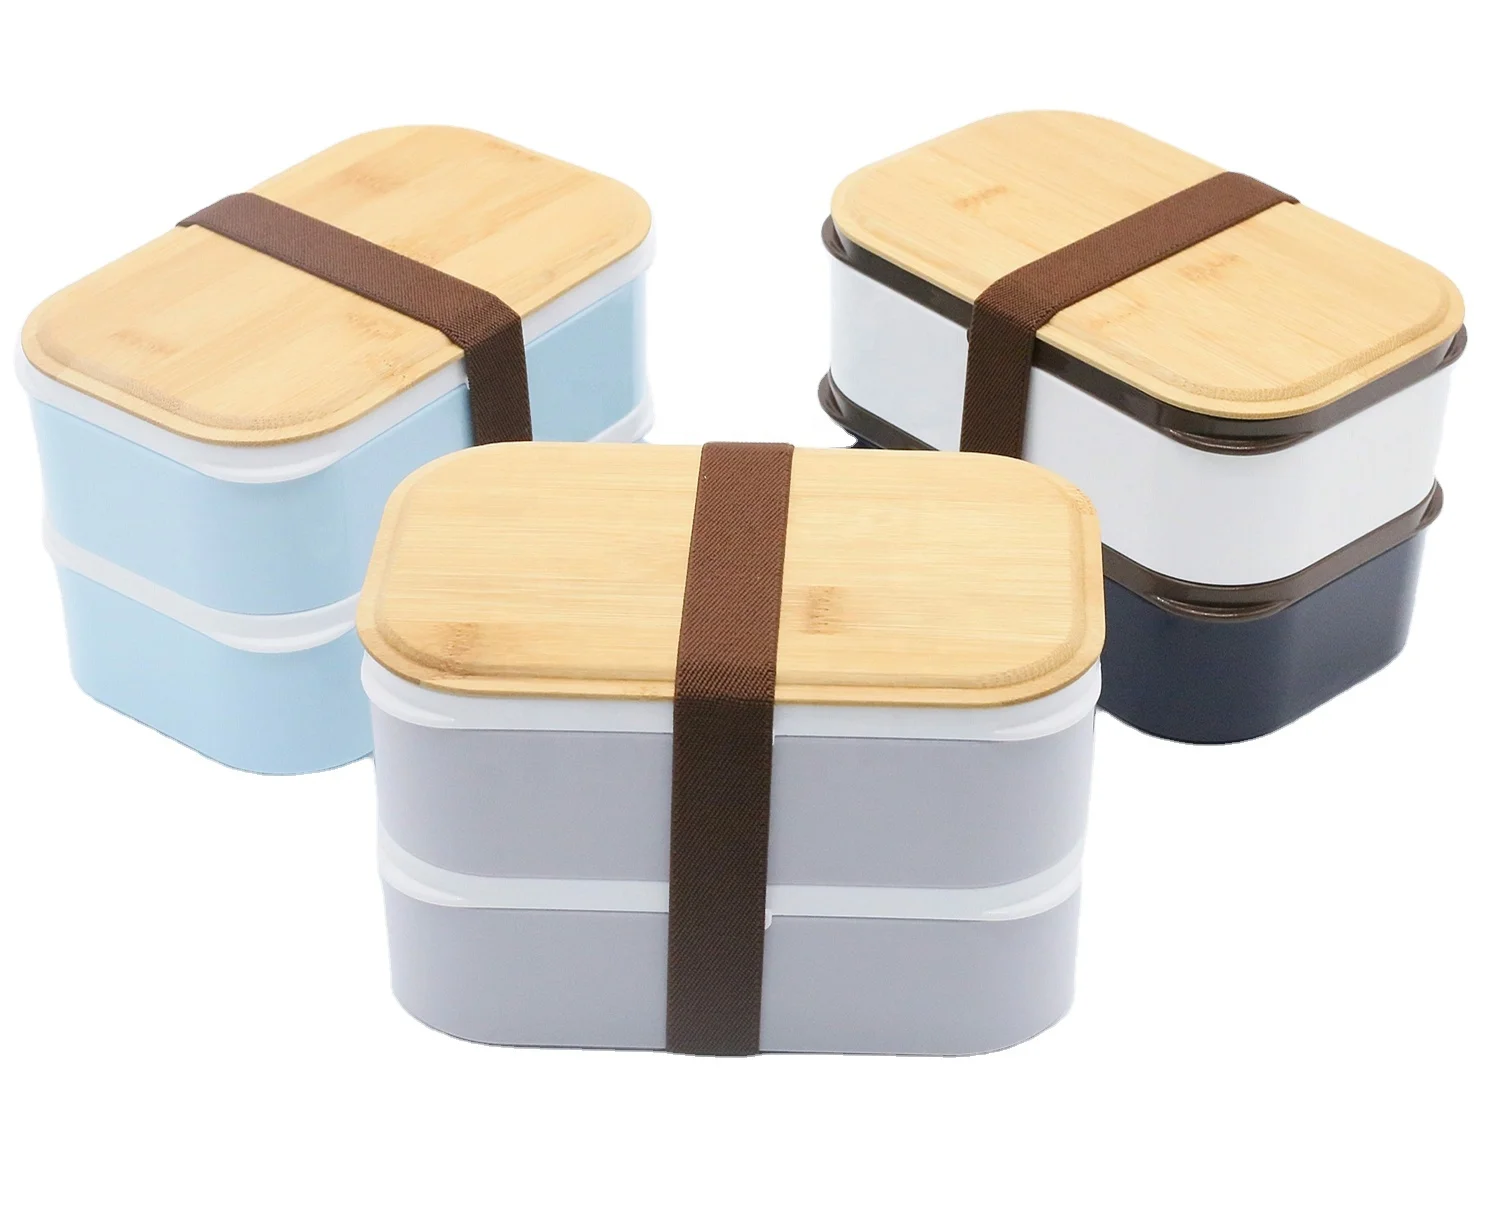 

Sample Avaliable 2021 BPA free 2 Tier Bamboo Bento Kids Heated Food Warmer PP Leak-Proof Lunch Box with Bamboo Lid with Divider, White/light blue/light grey/brown